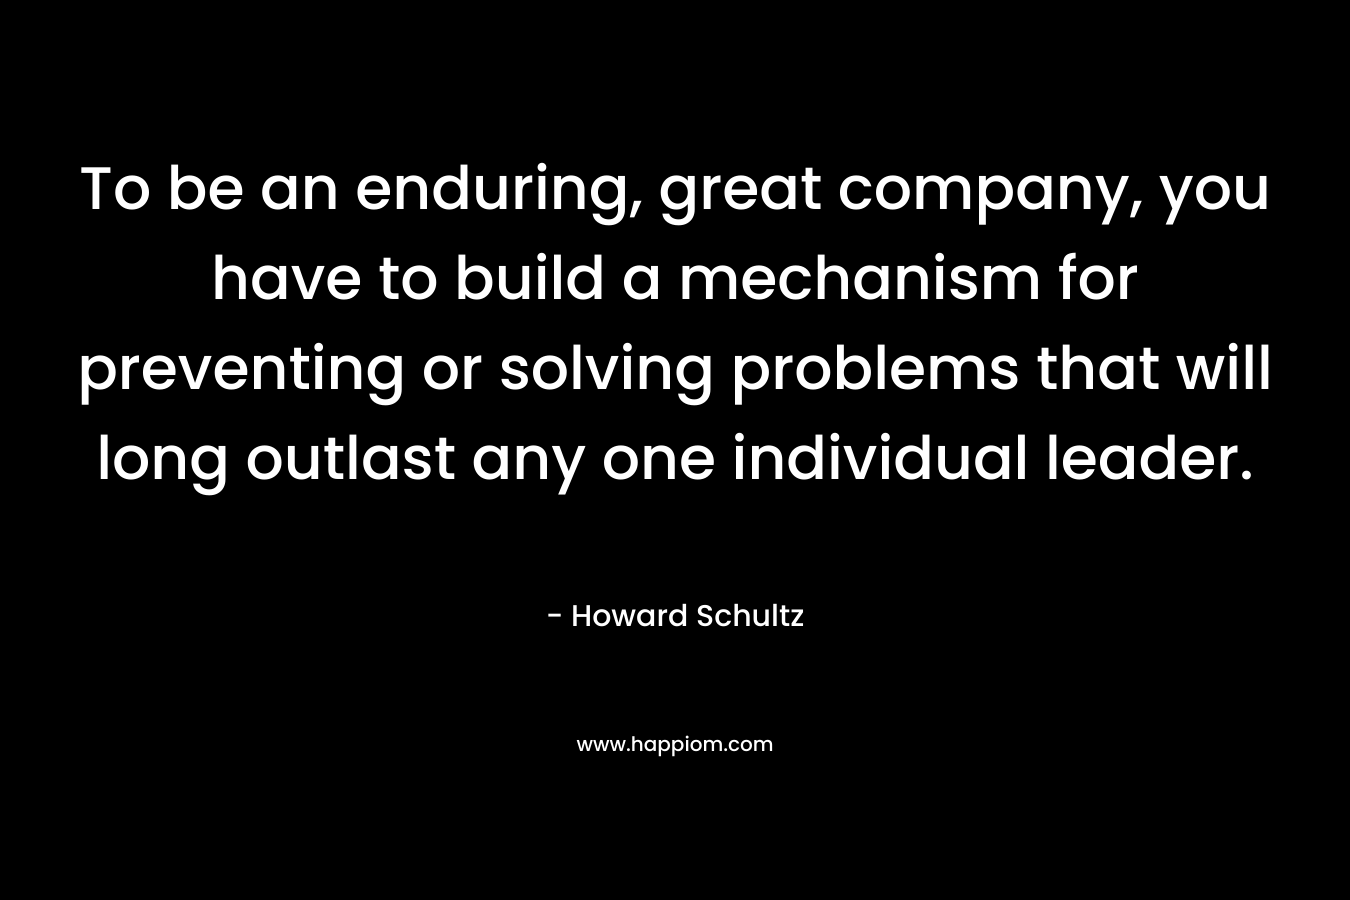 To be an enduring, great company, you have to build a mechanism for preventing or solving problems that will long outlast any one individual leader.